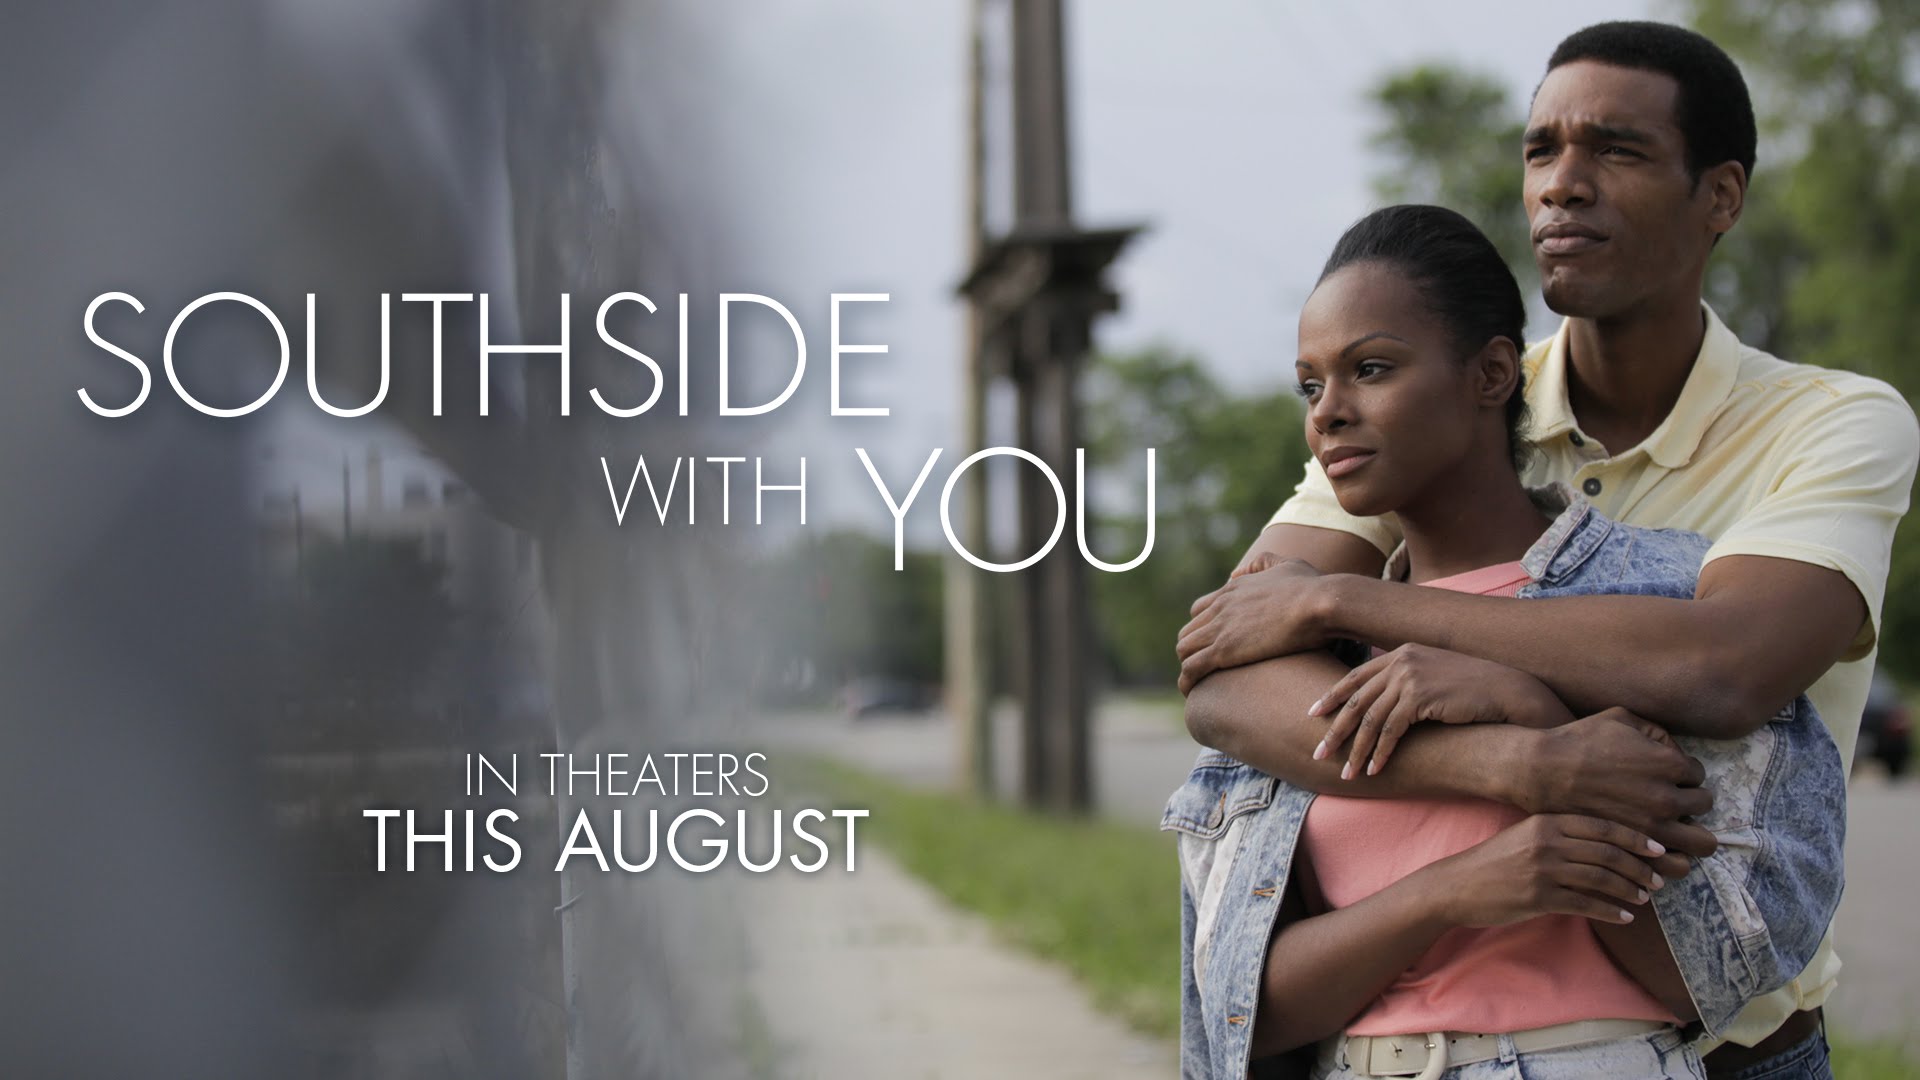 southside with you showtimes near me